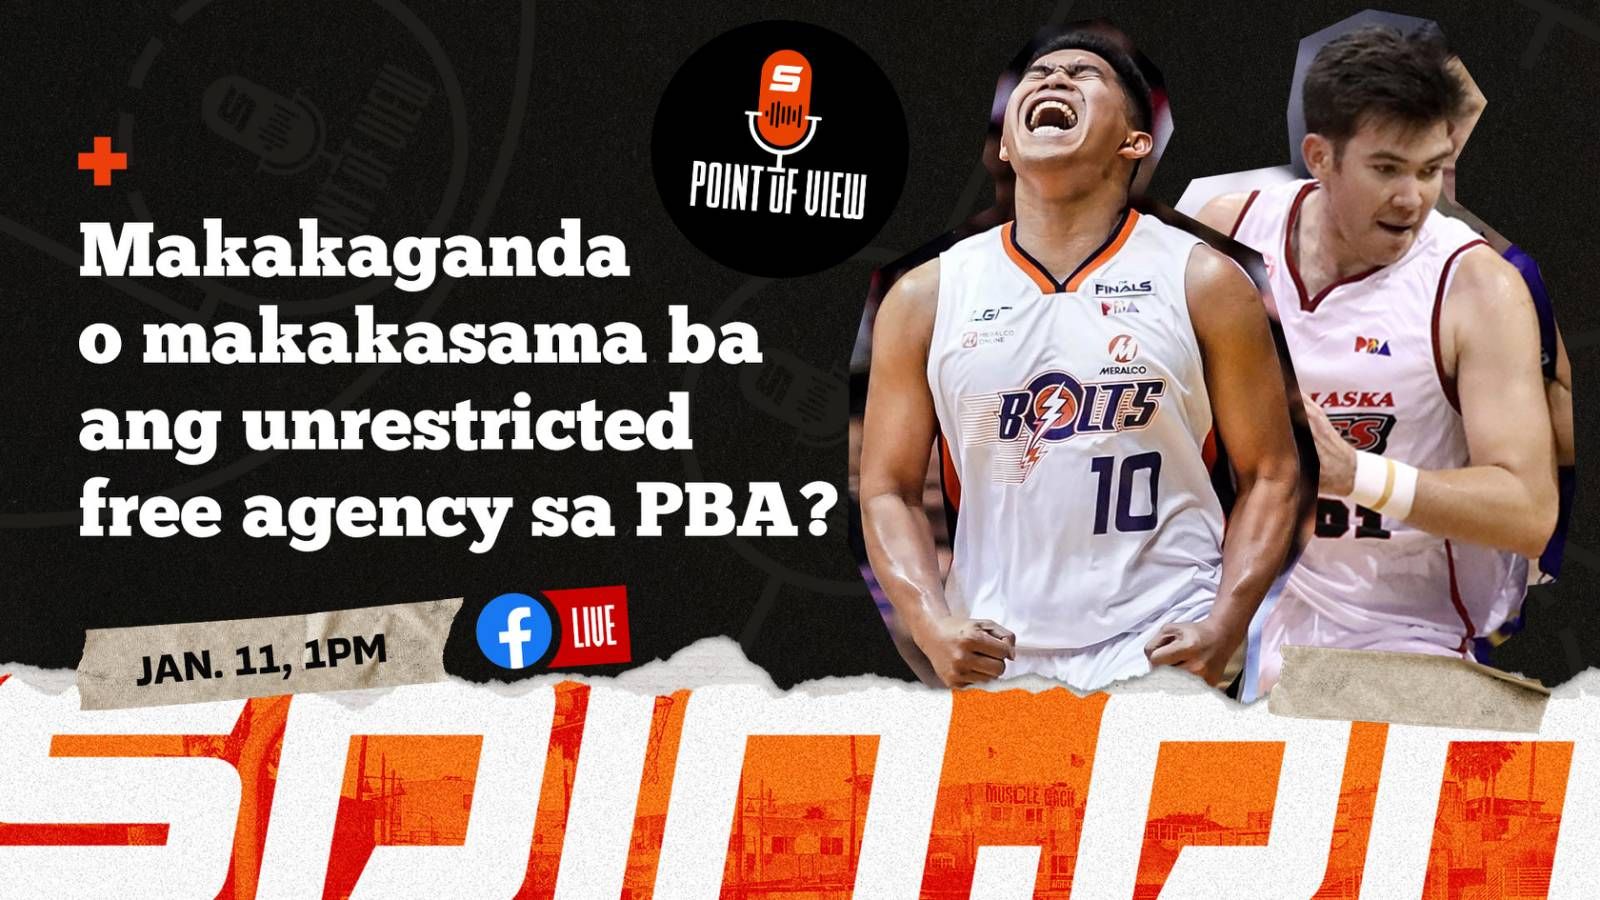 spin pov, pba unrestricted free agency